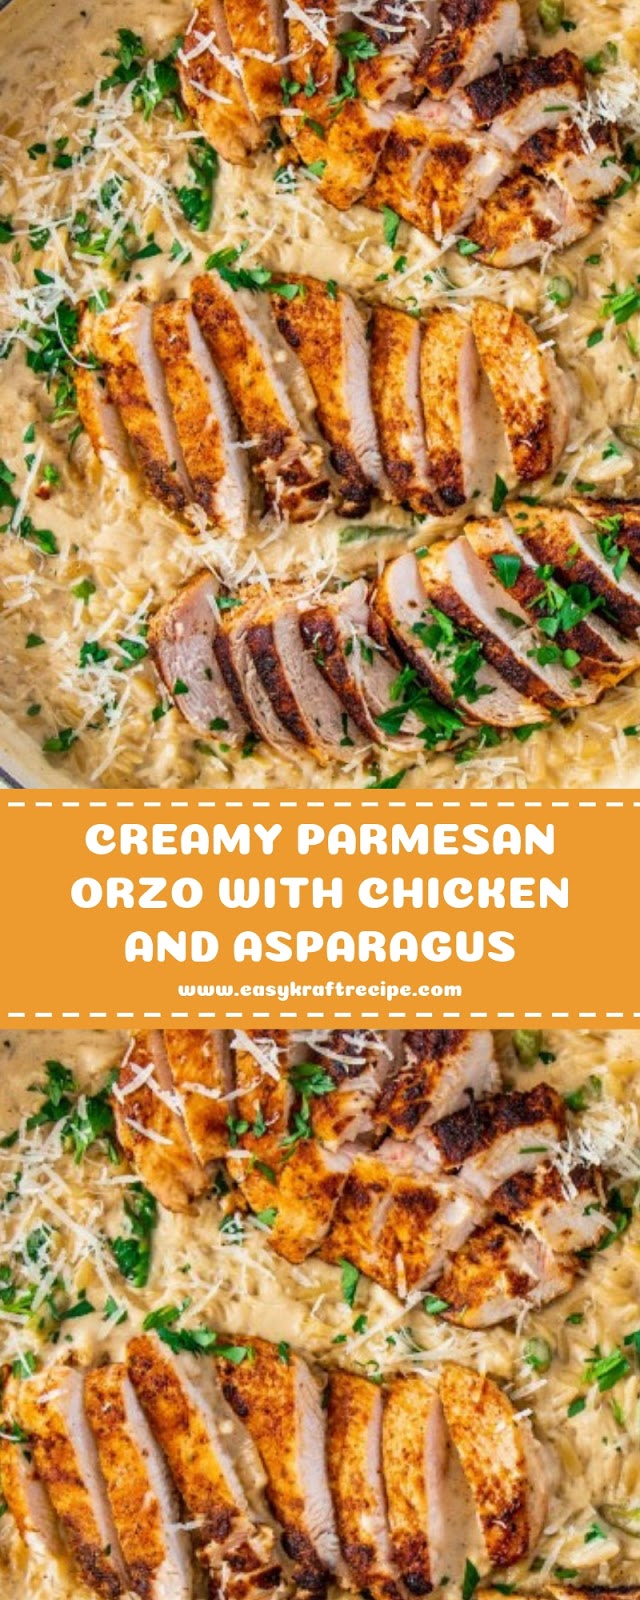 CREAMY PARMESAN ORZO WITH CHICKEN AND ASPARAGUS